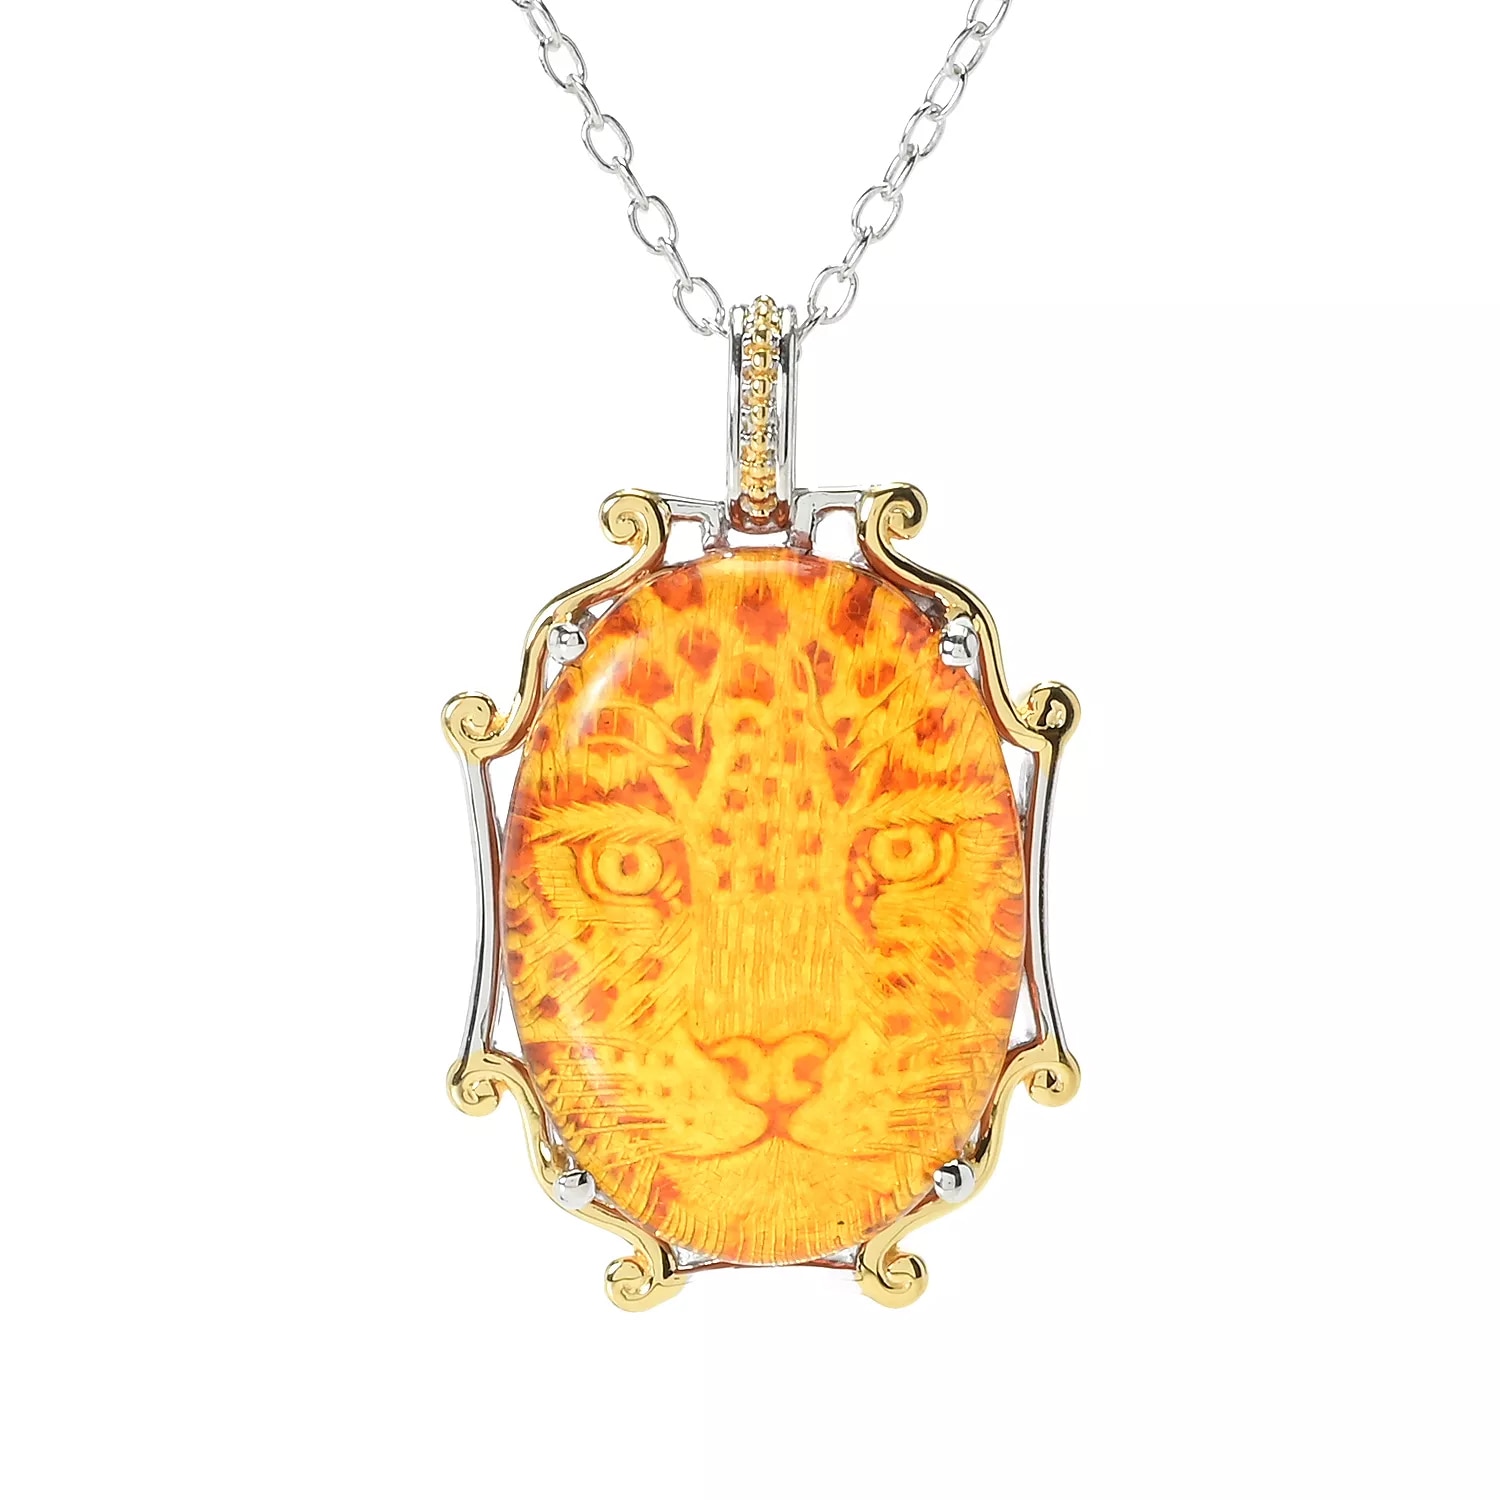 Gems En Vogue Palladium Silver Panther Carved Amber Pendant With Chain